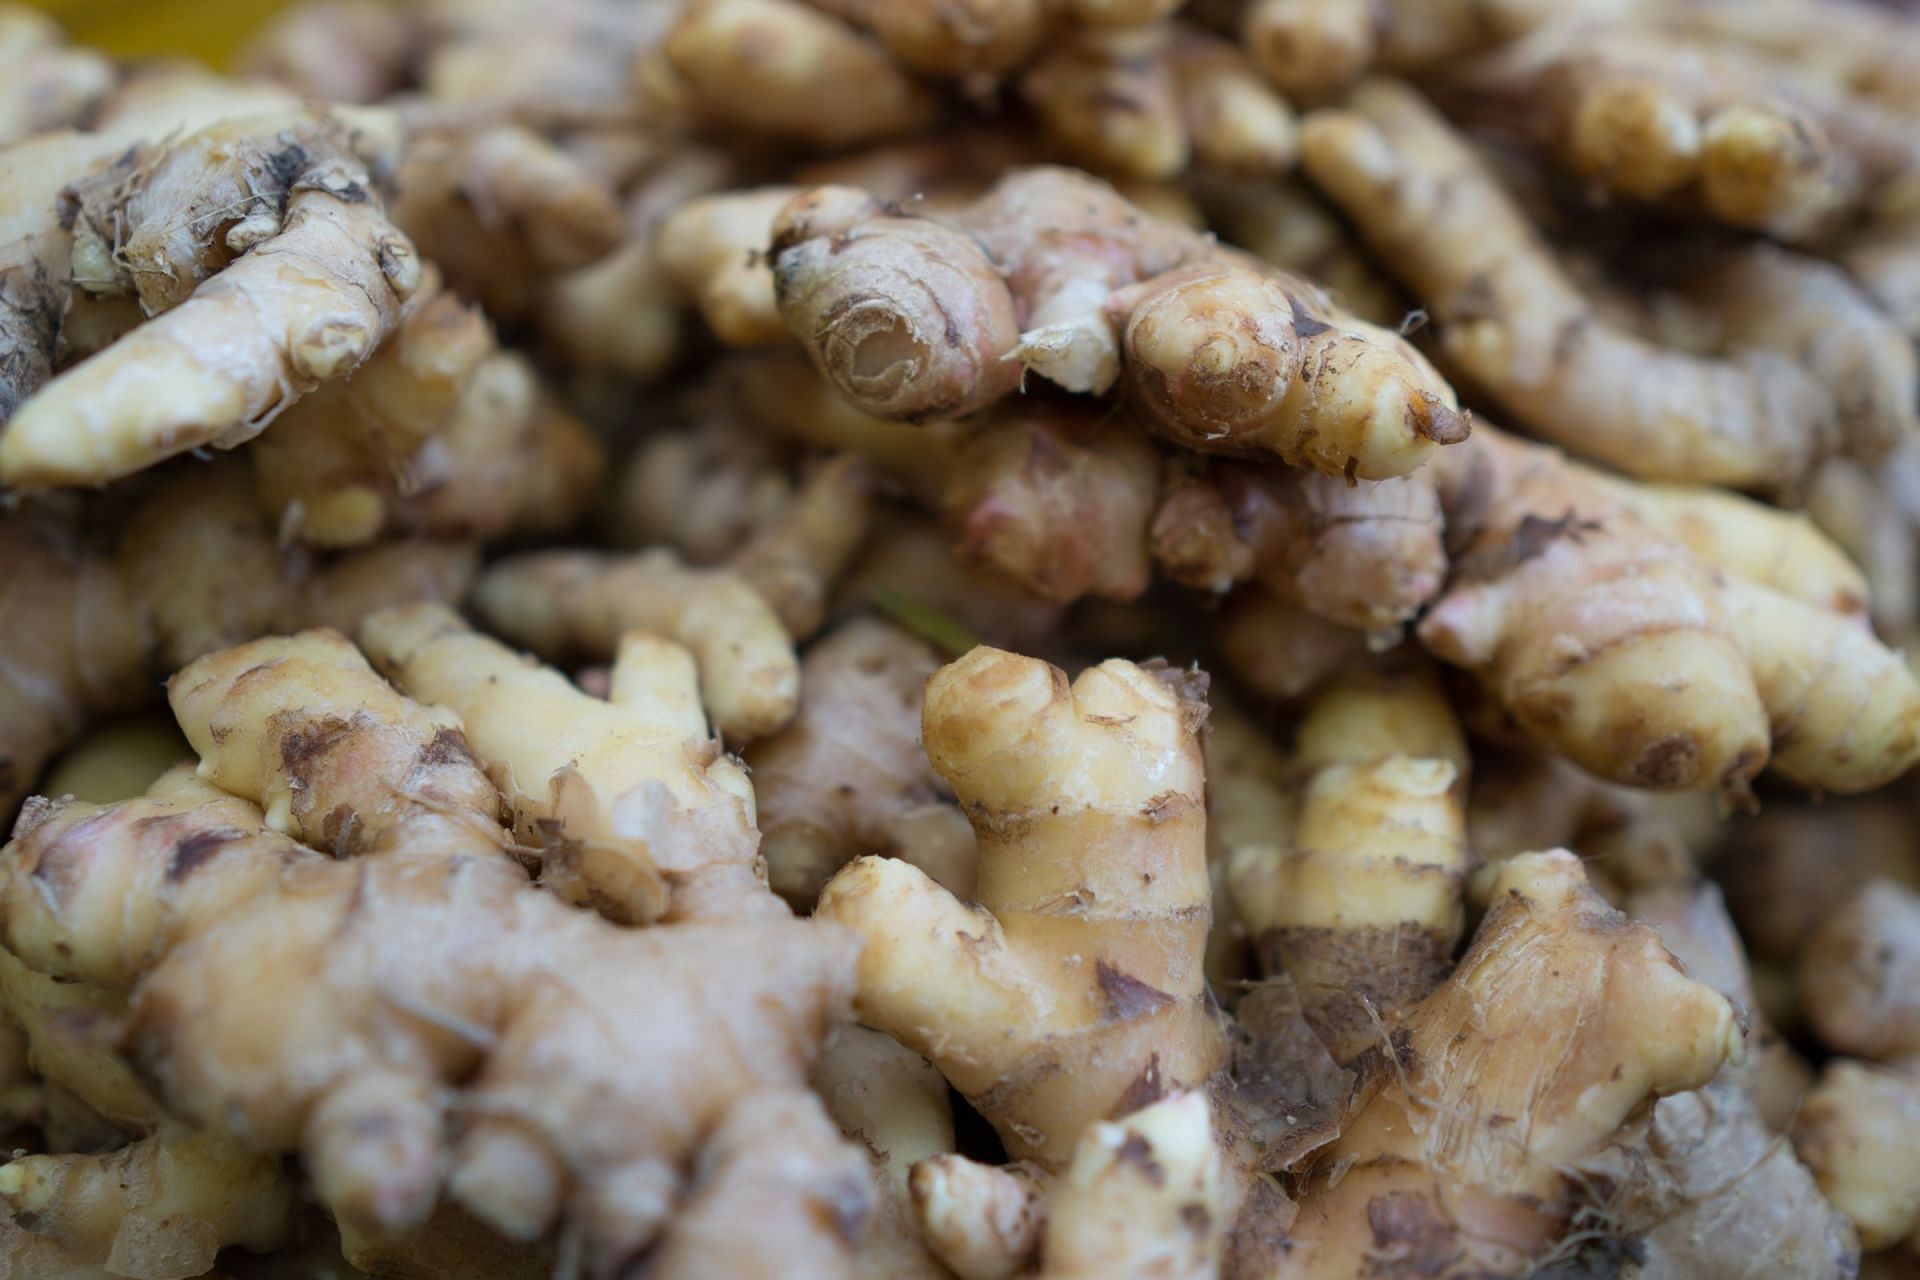 Ginger is packed with nutrition. (Photo by Dean David on Unsplash)